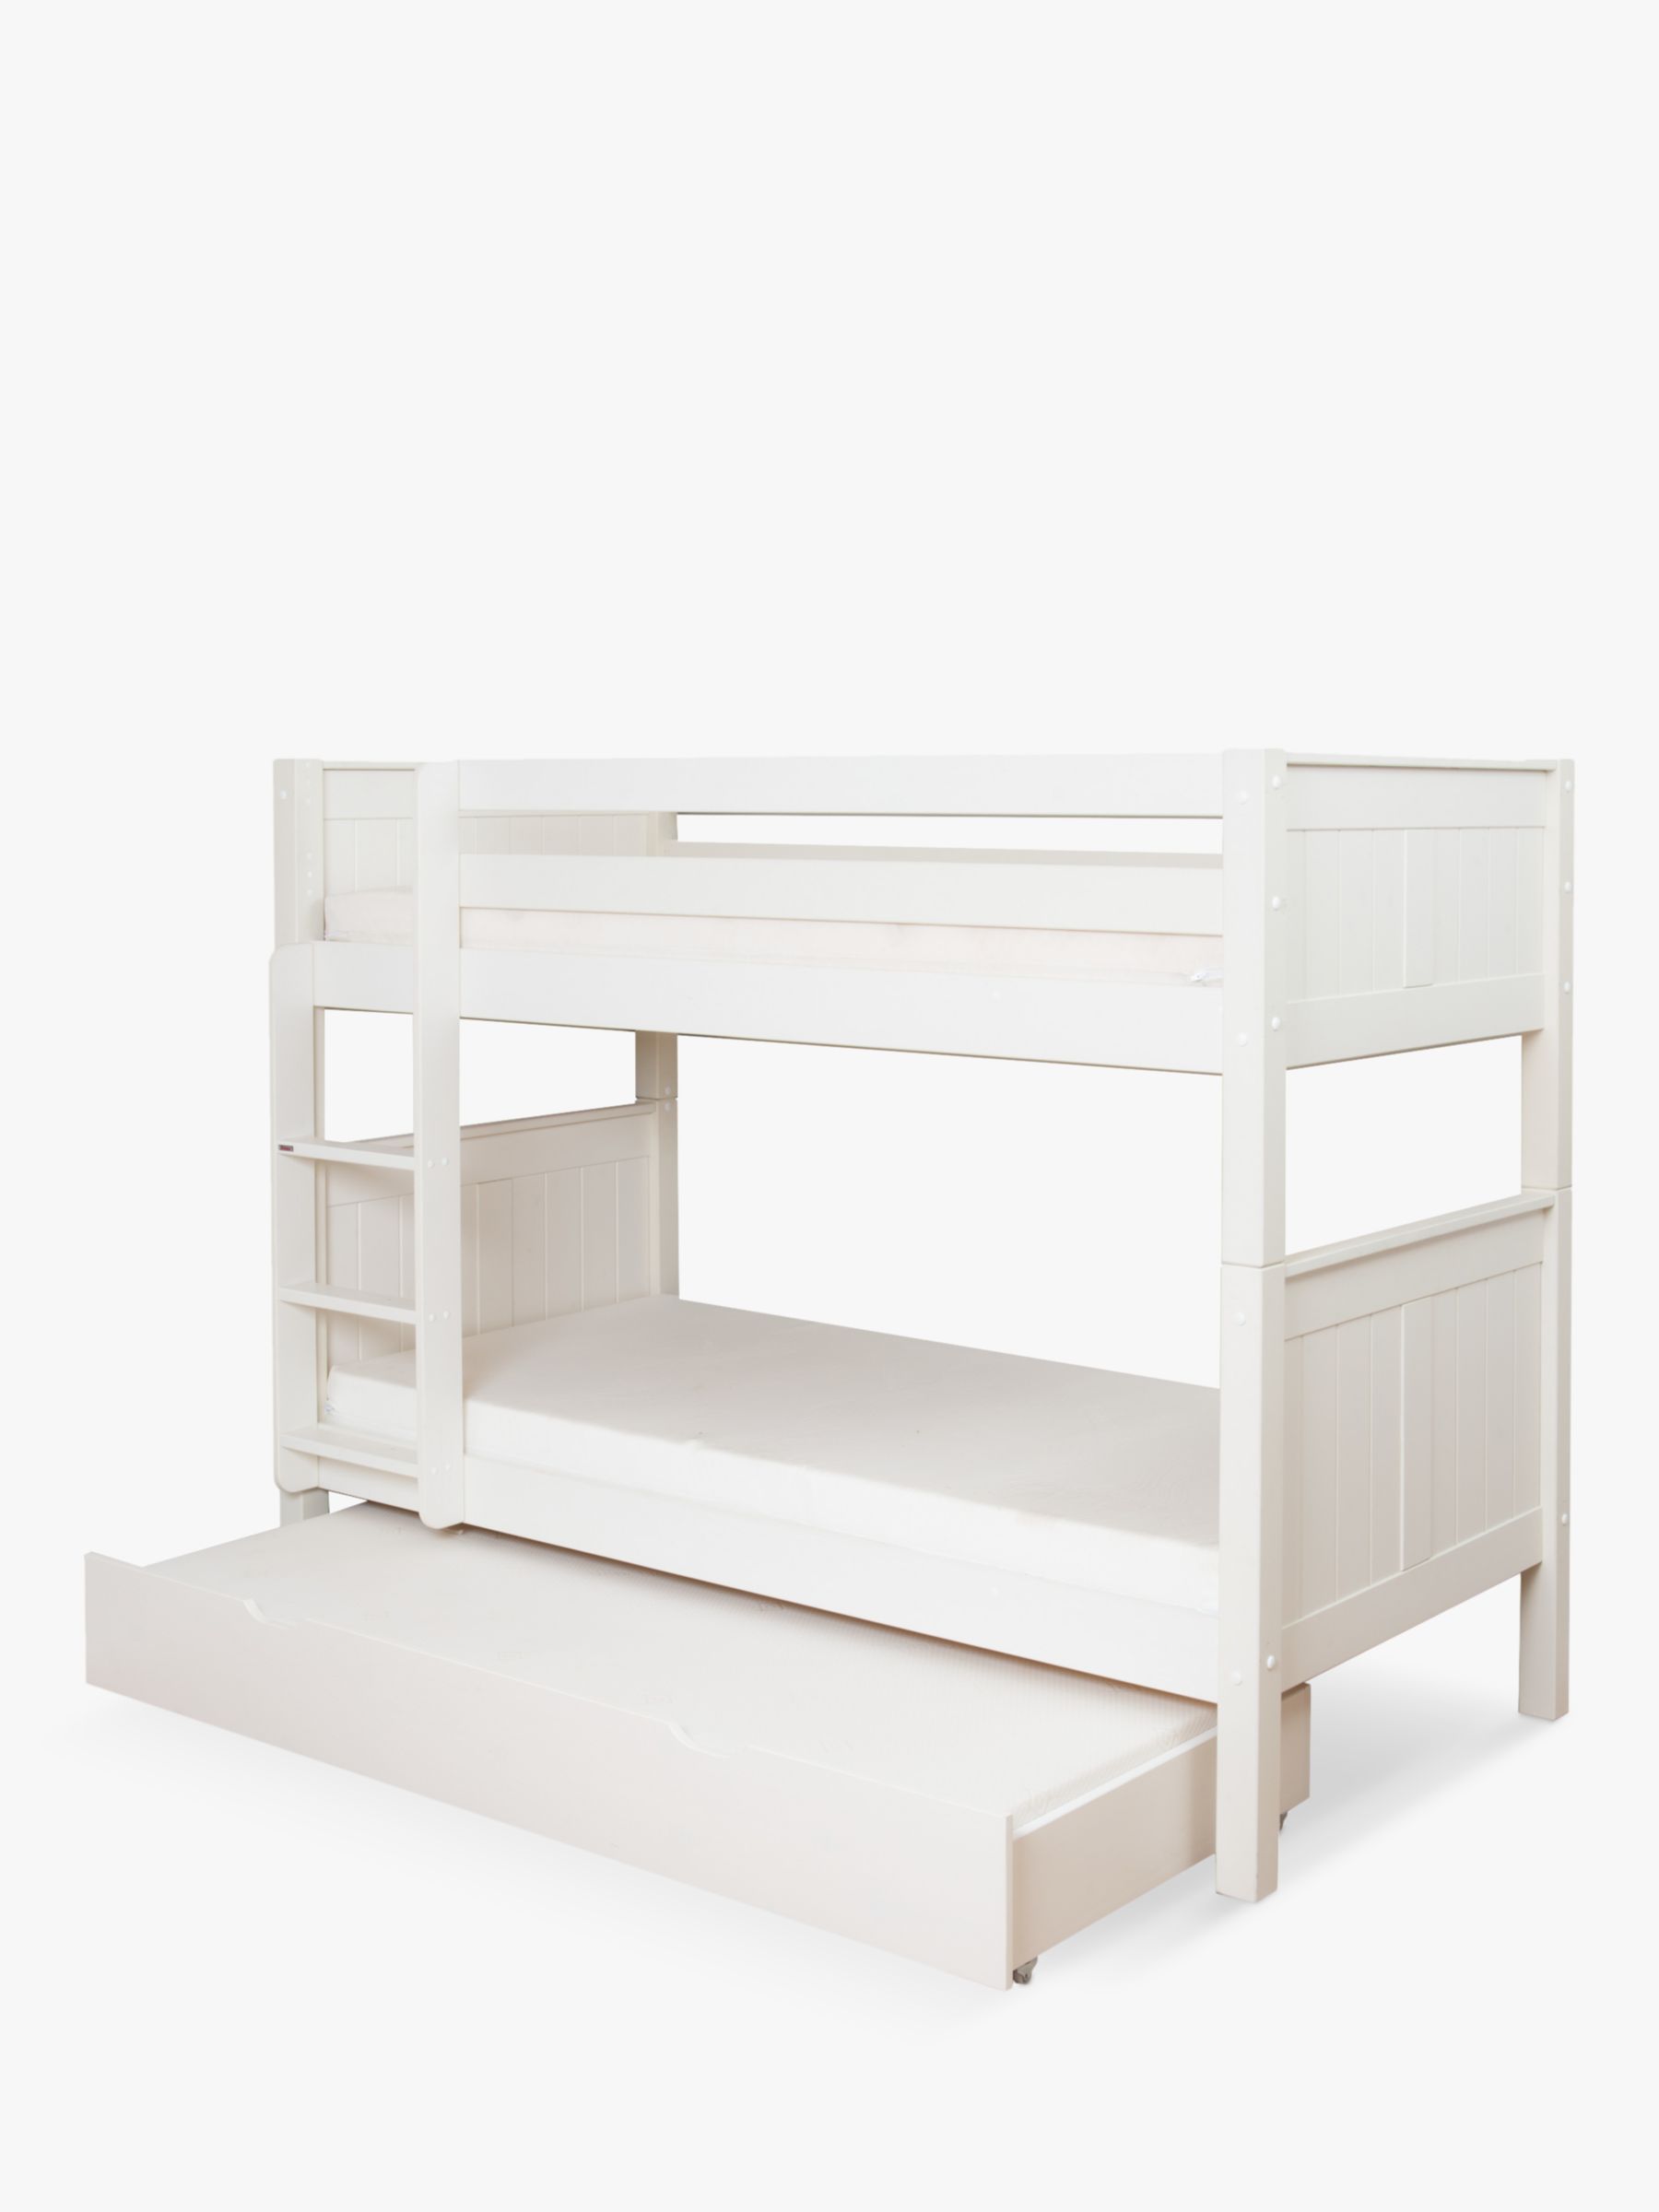 Bunk Beds John Lewis Partners, White Bunk Beds With Pull Out Bed